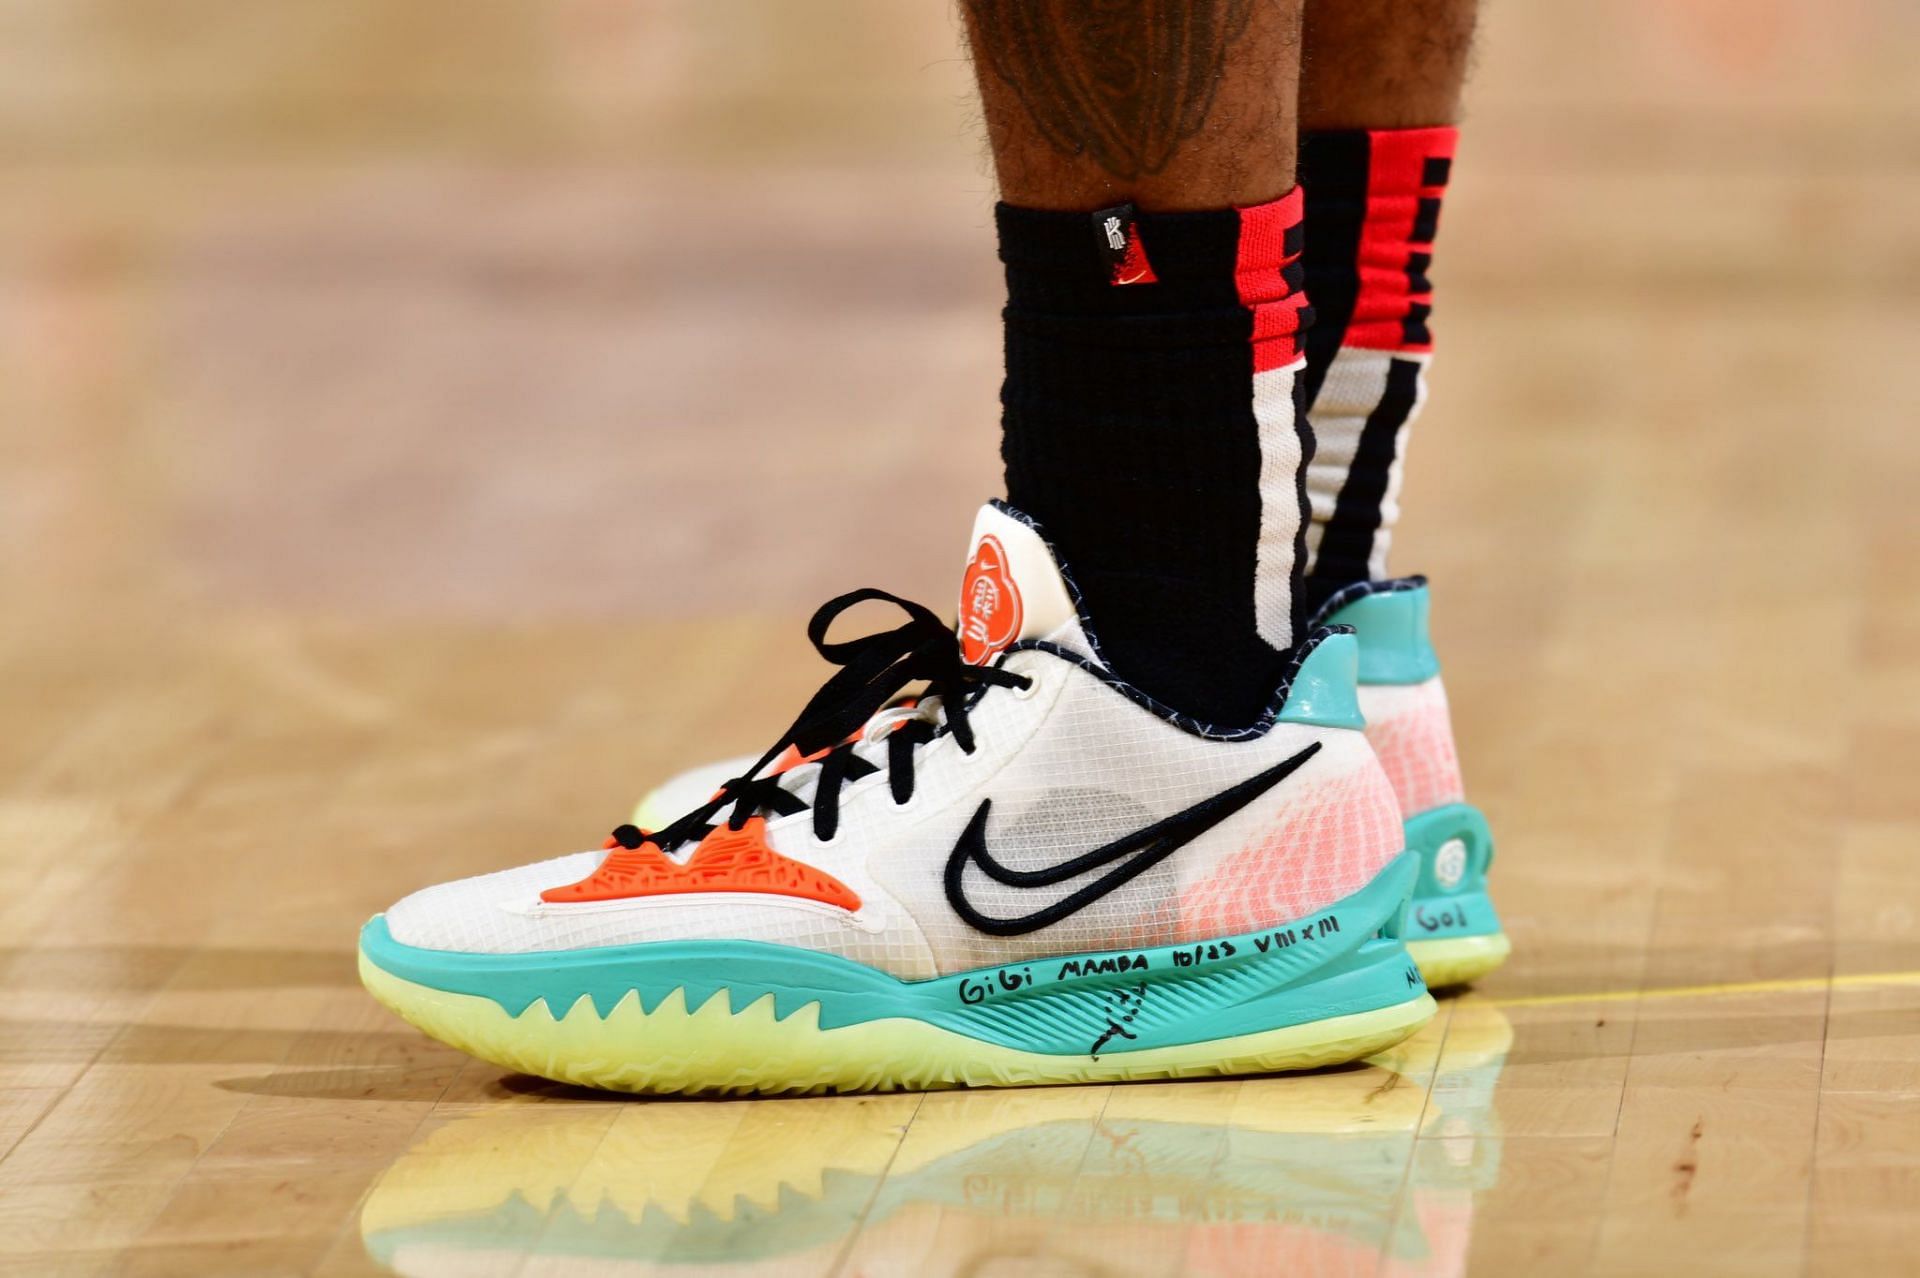 Nike Kyrie Low 4 shoes are very popular among athletes (Image via Getty Images)